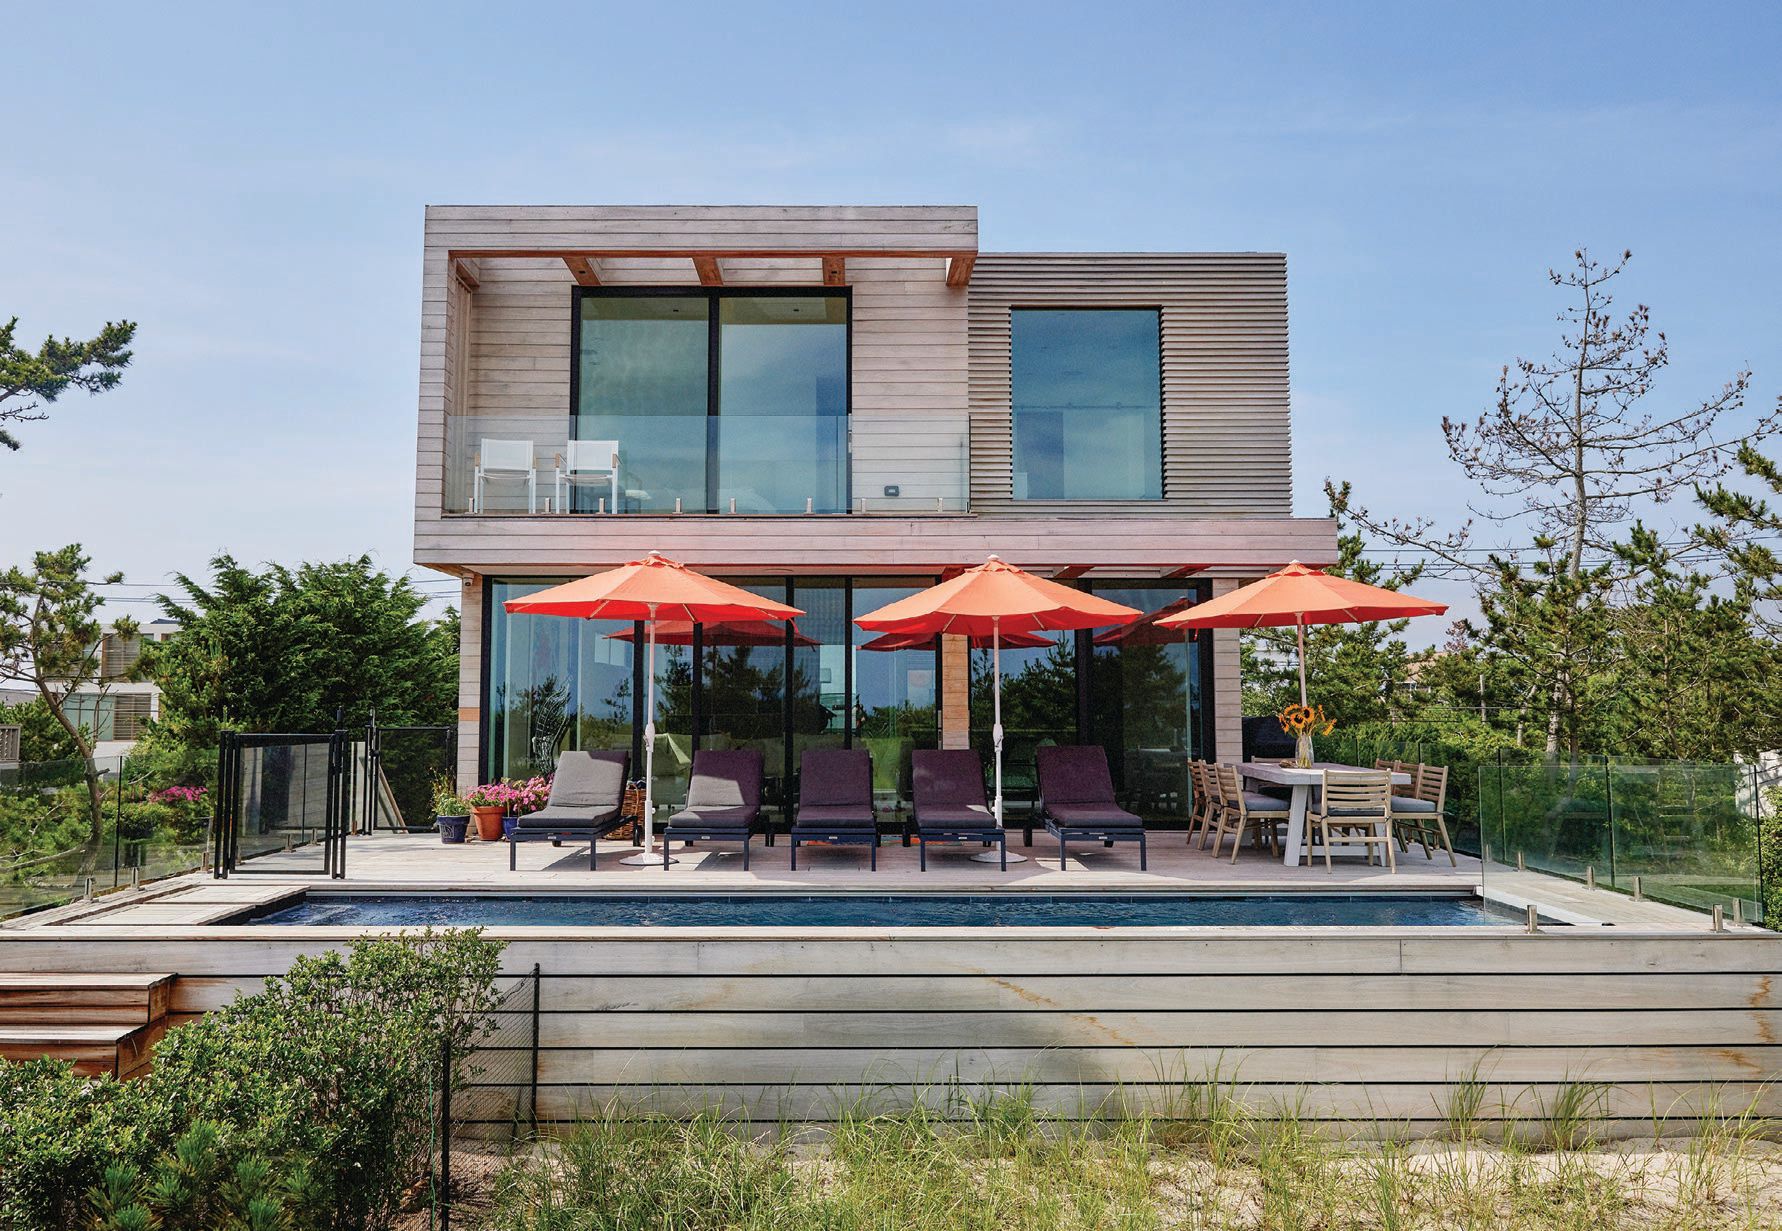 Dotted with cheerful umbrellas, the clean lines of the home’s exterior designed by Rocco Lettieri give its residents a clear view straight to the water. PHOTOGRAPHED BY ZEV STARR-TAMBOR